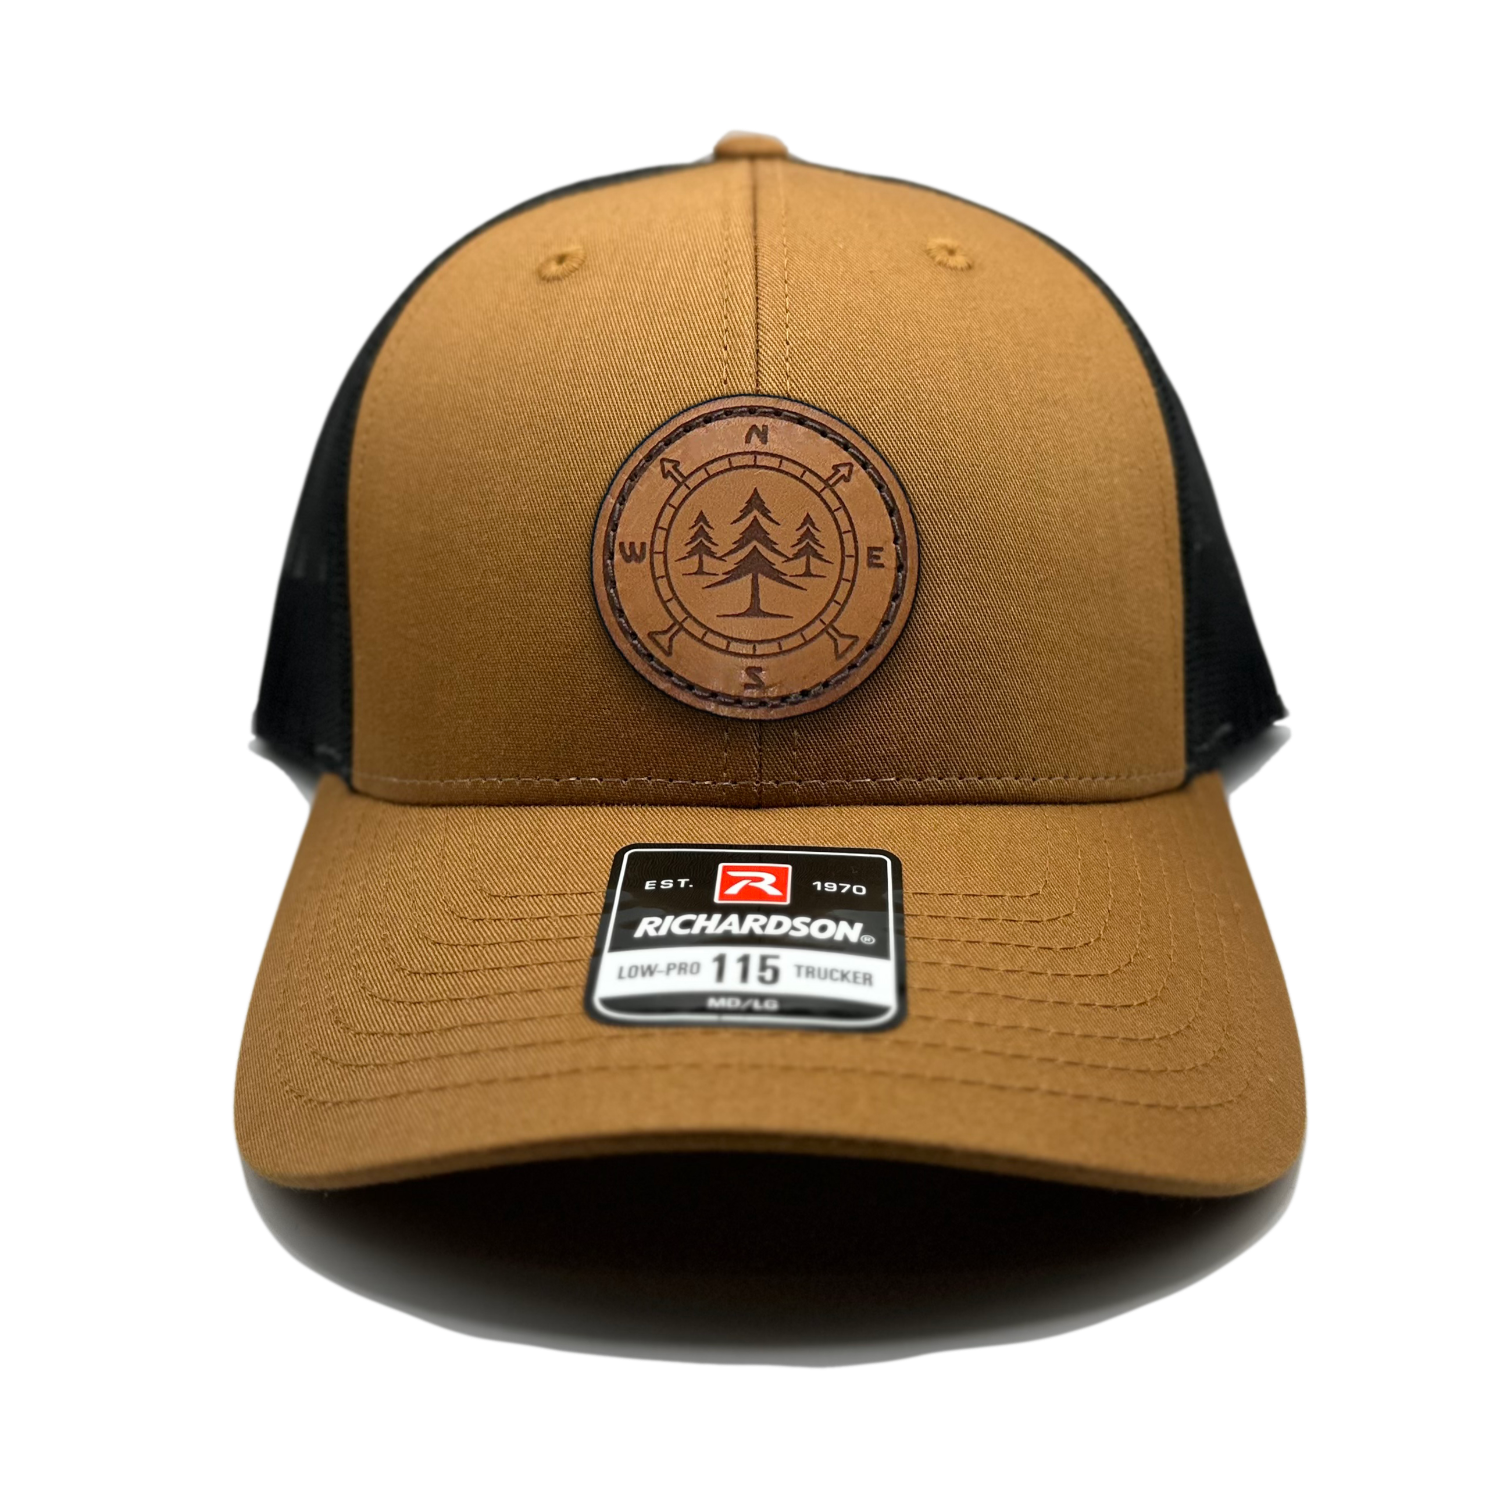 A close-up photo of a leather patch hat called Lost Pines. The hat features a unique compass and pine trees design on a circular leather patch that is sewn onto the front. The hat is a Carmel/black Richardson 115 low profile SnapBack adjustable hat, made in the USA. Available m/l sizes and multiple colors. Inspired by the mountains of Colorado, USA. 